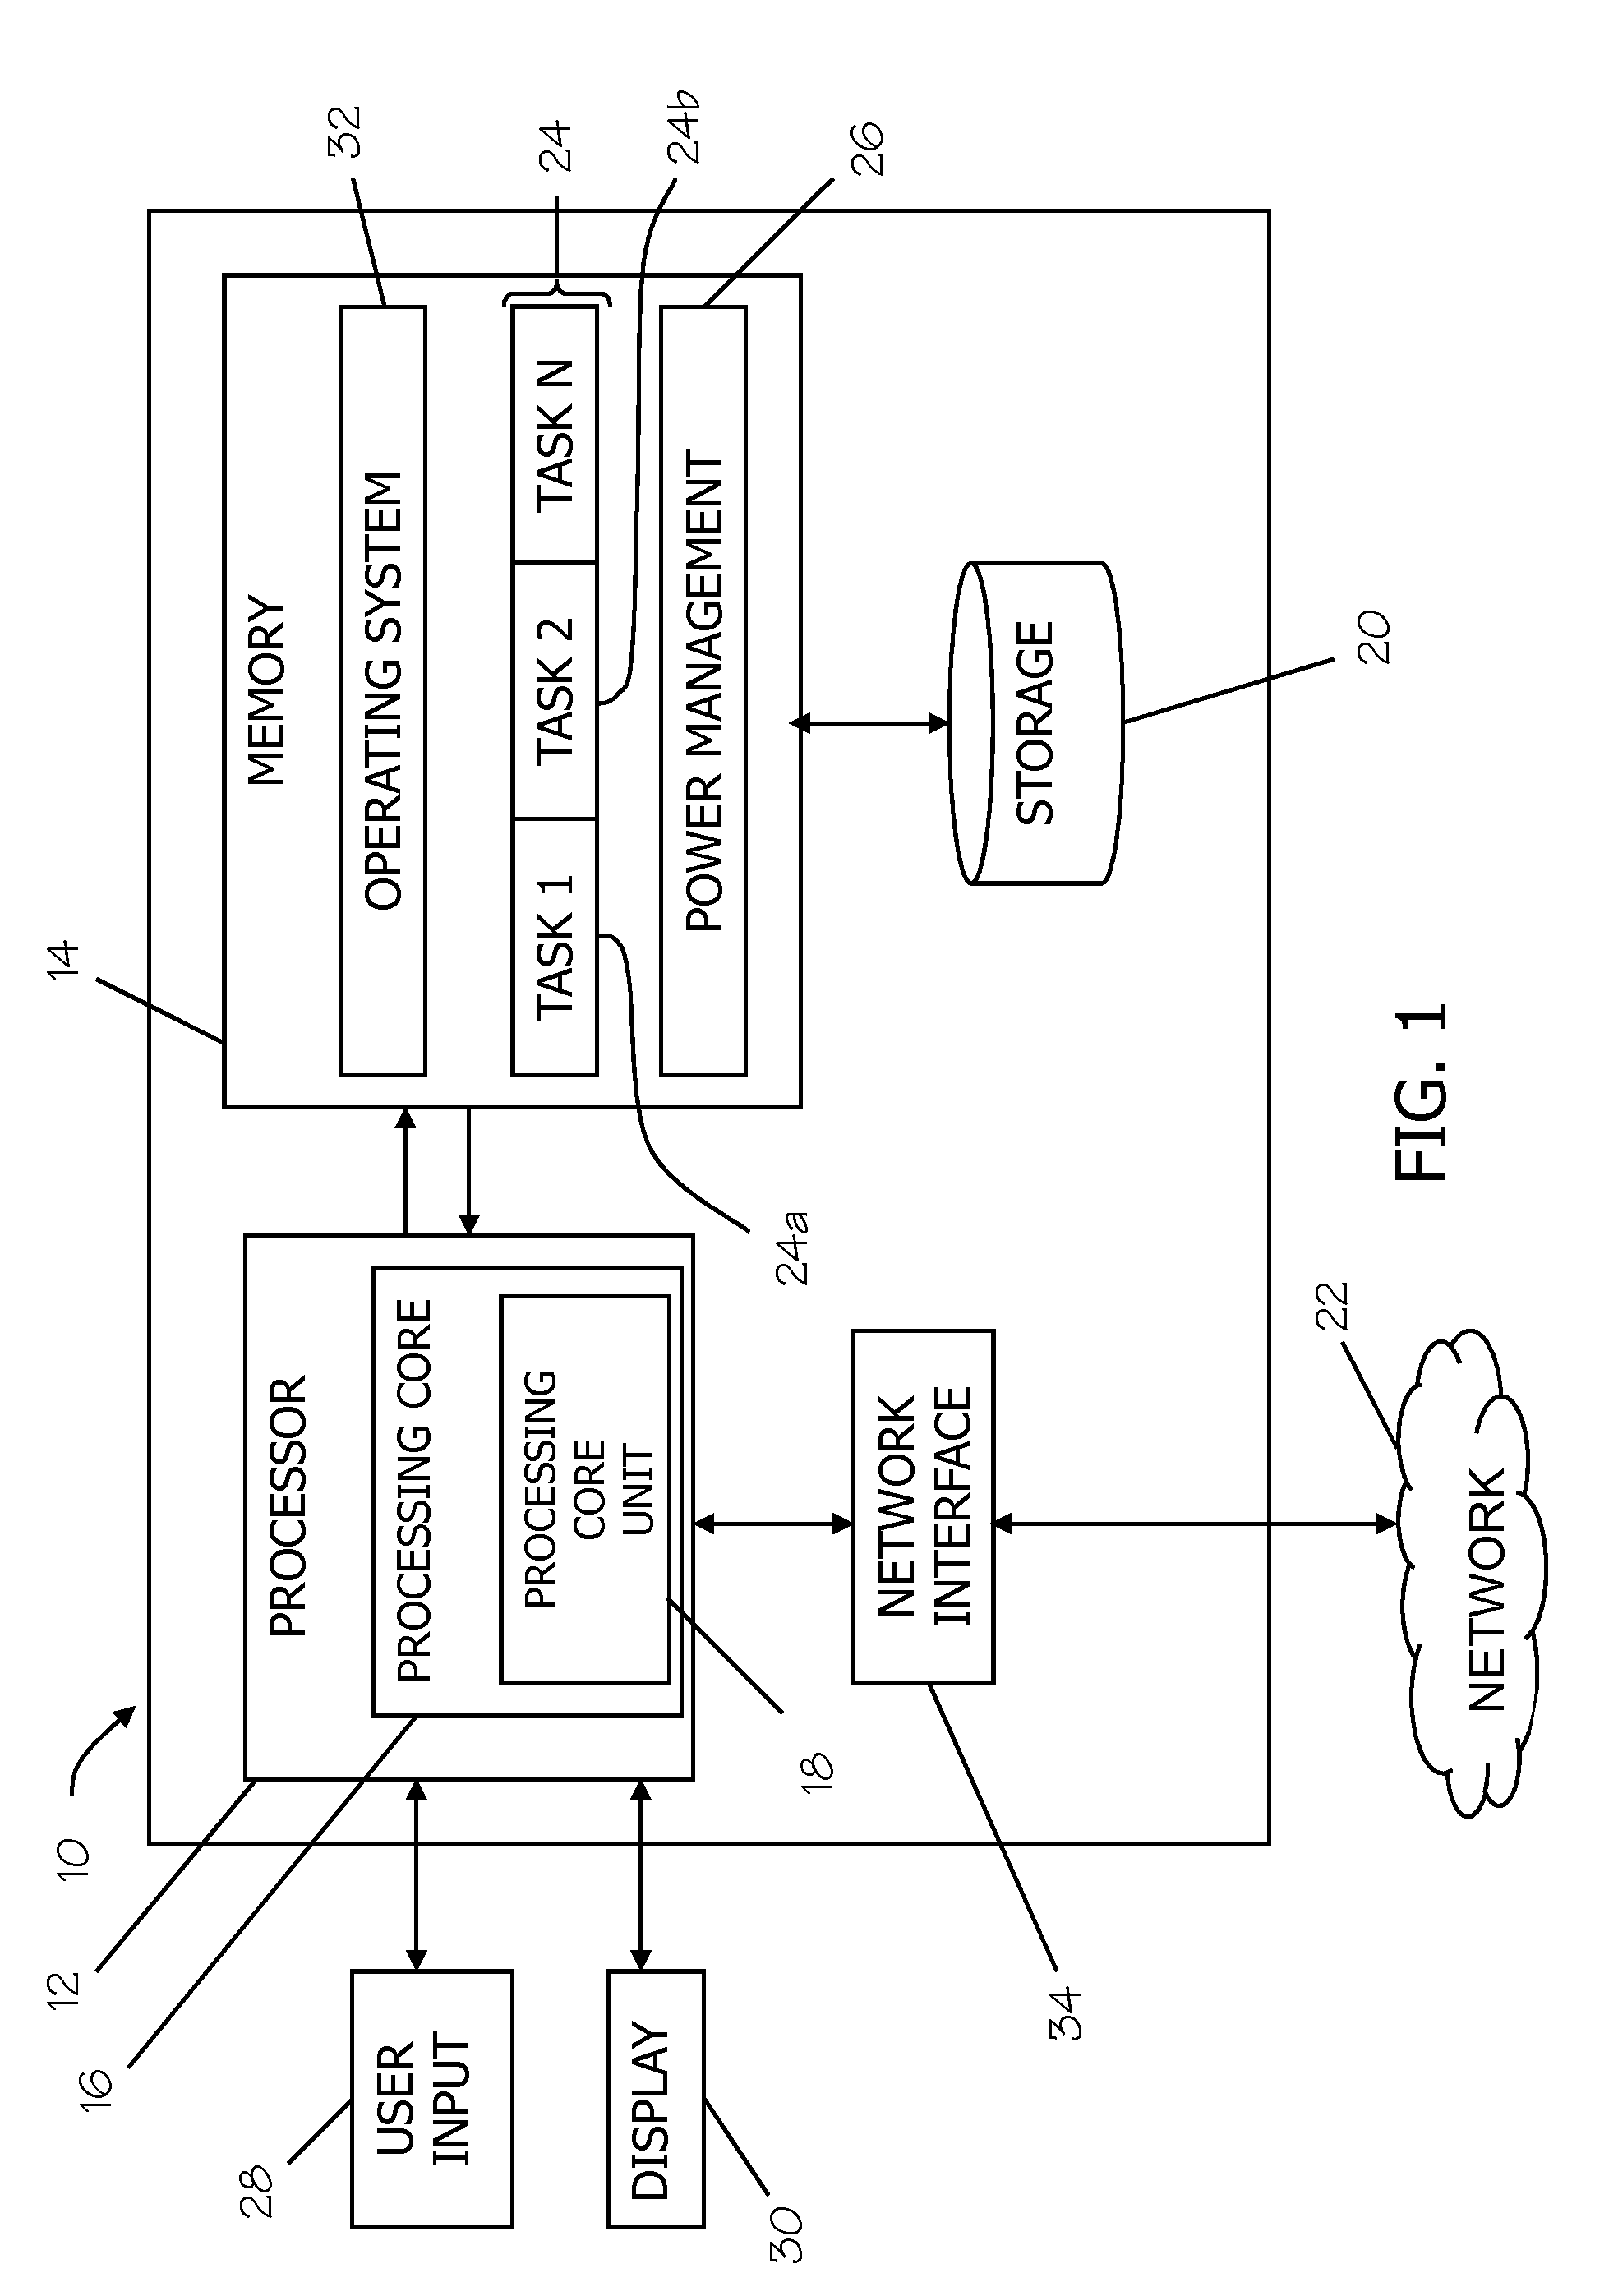 Computer System Power Management Based on Task Criticality